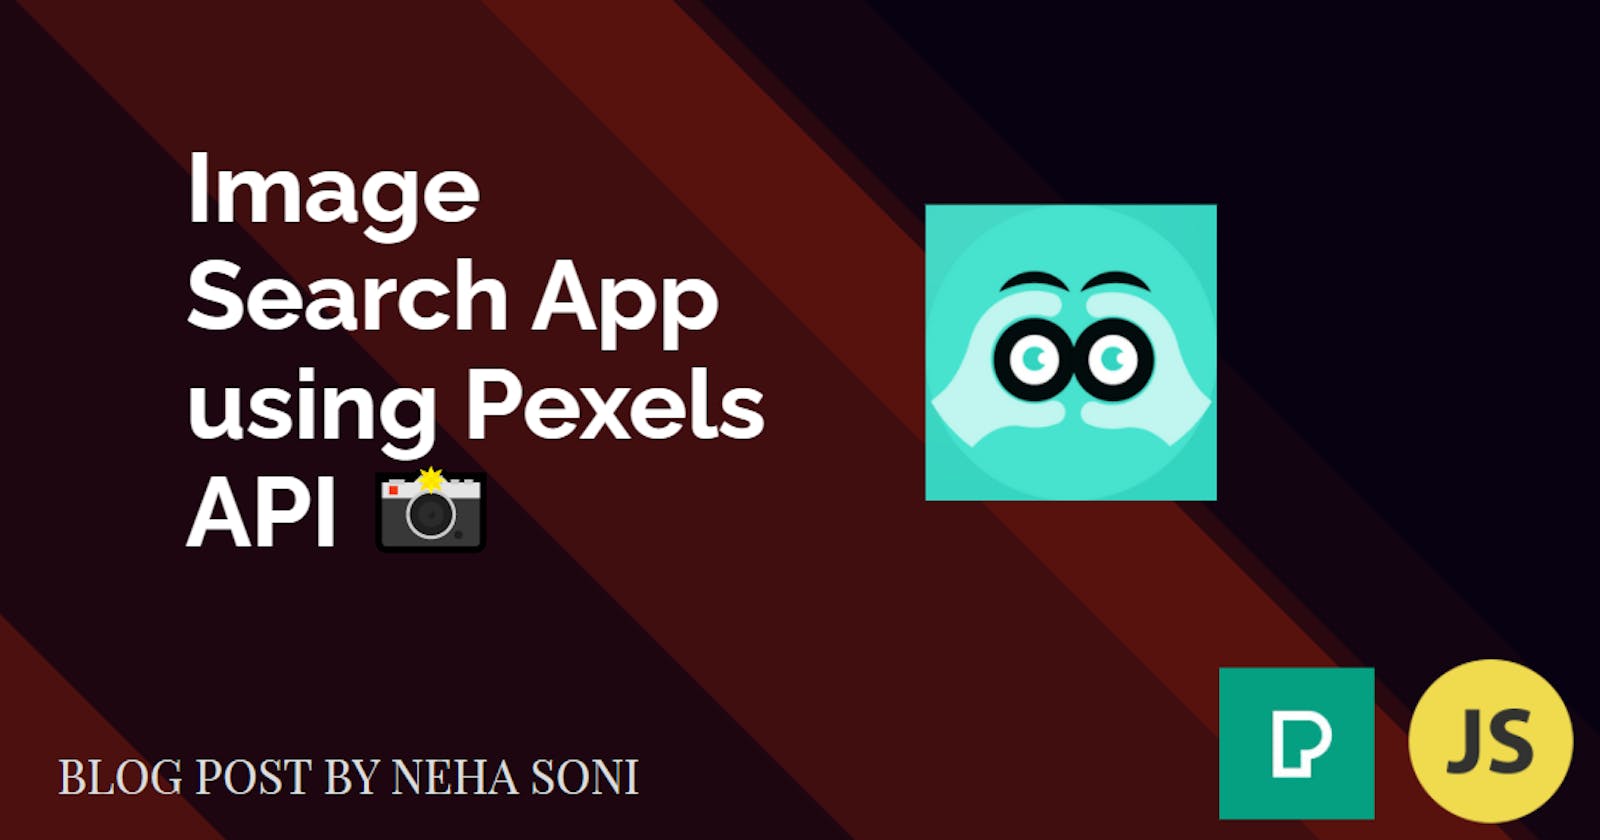 Create an amazing Image Search App using Pexels API